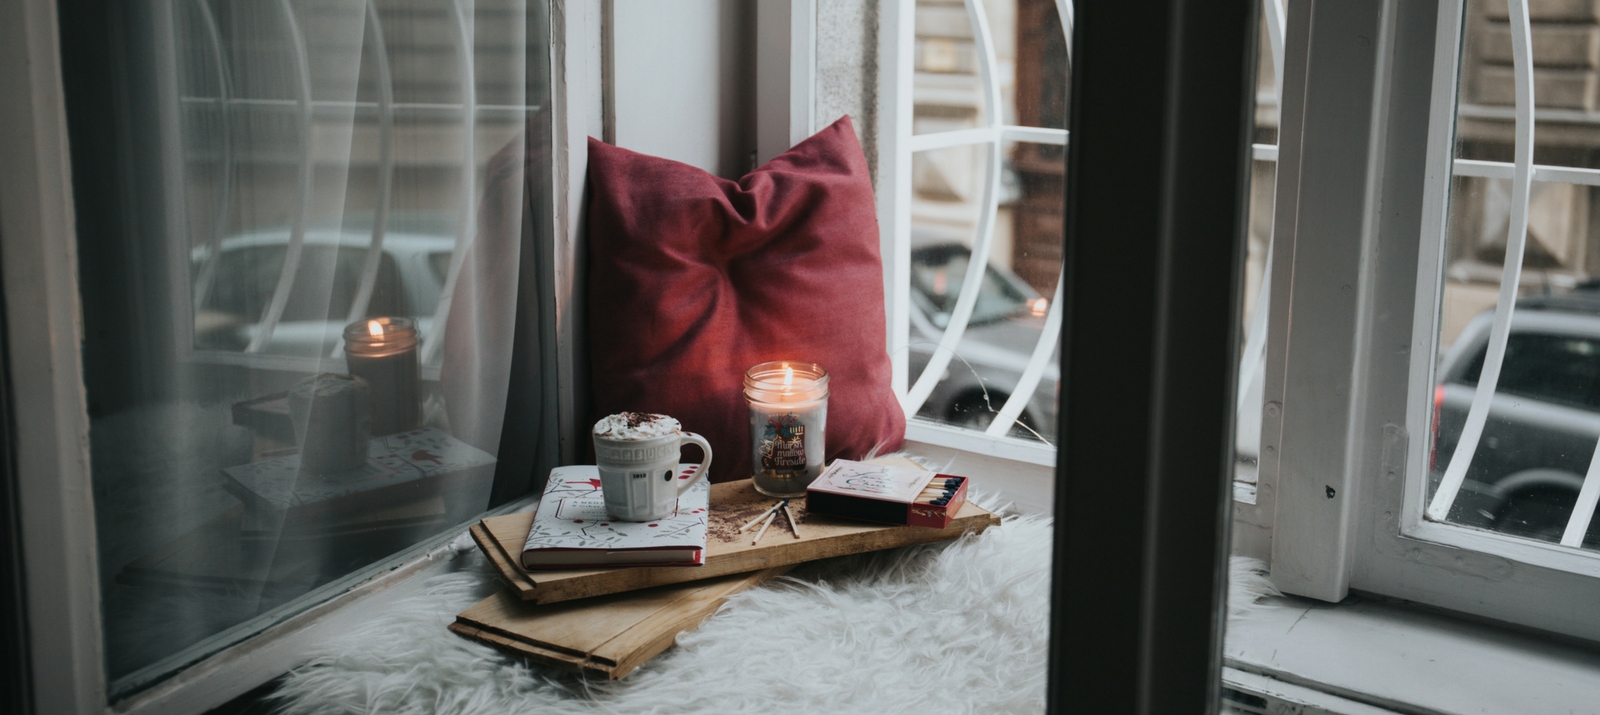 how to hygge your home and life: embrace coziness, healthy hedonism, decluttering, minimalism, and spending quality time with others